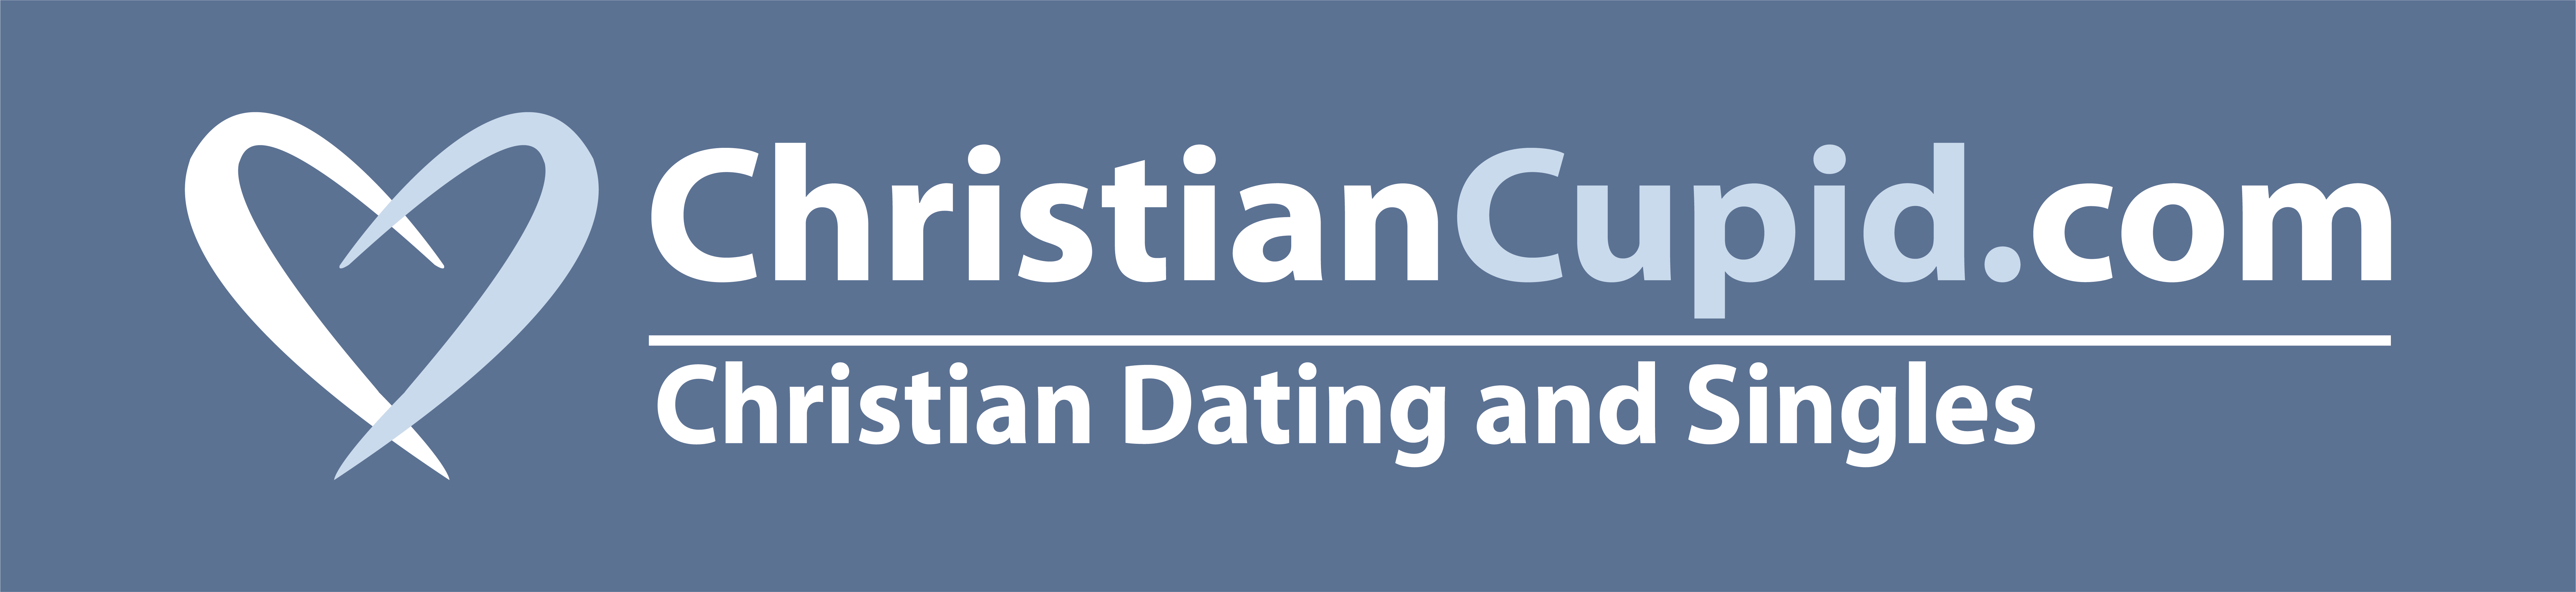 10 Best Christian Dating Apps and Sites of 2021